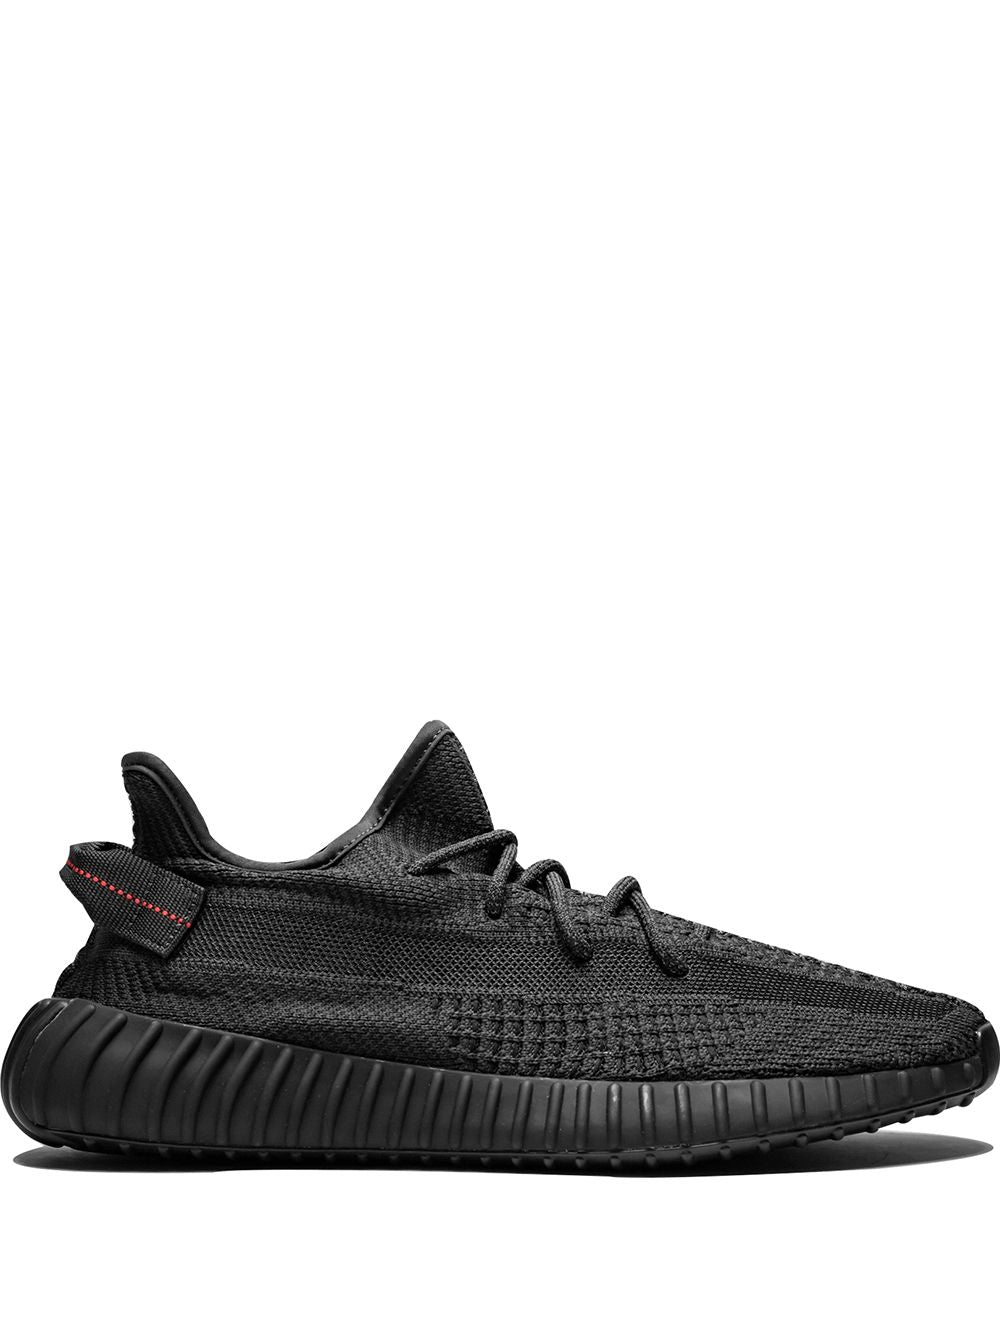 Adidas Yeezy Boost 350 V2 "Black Static" sneakers